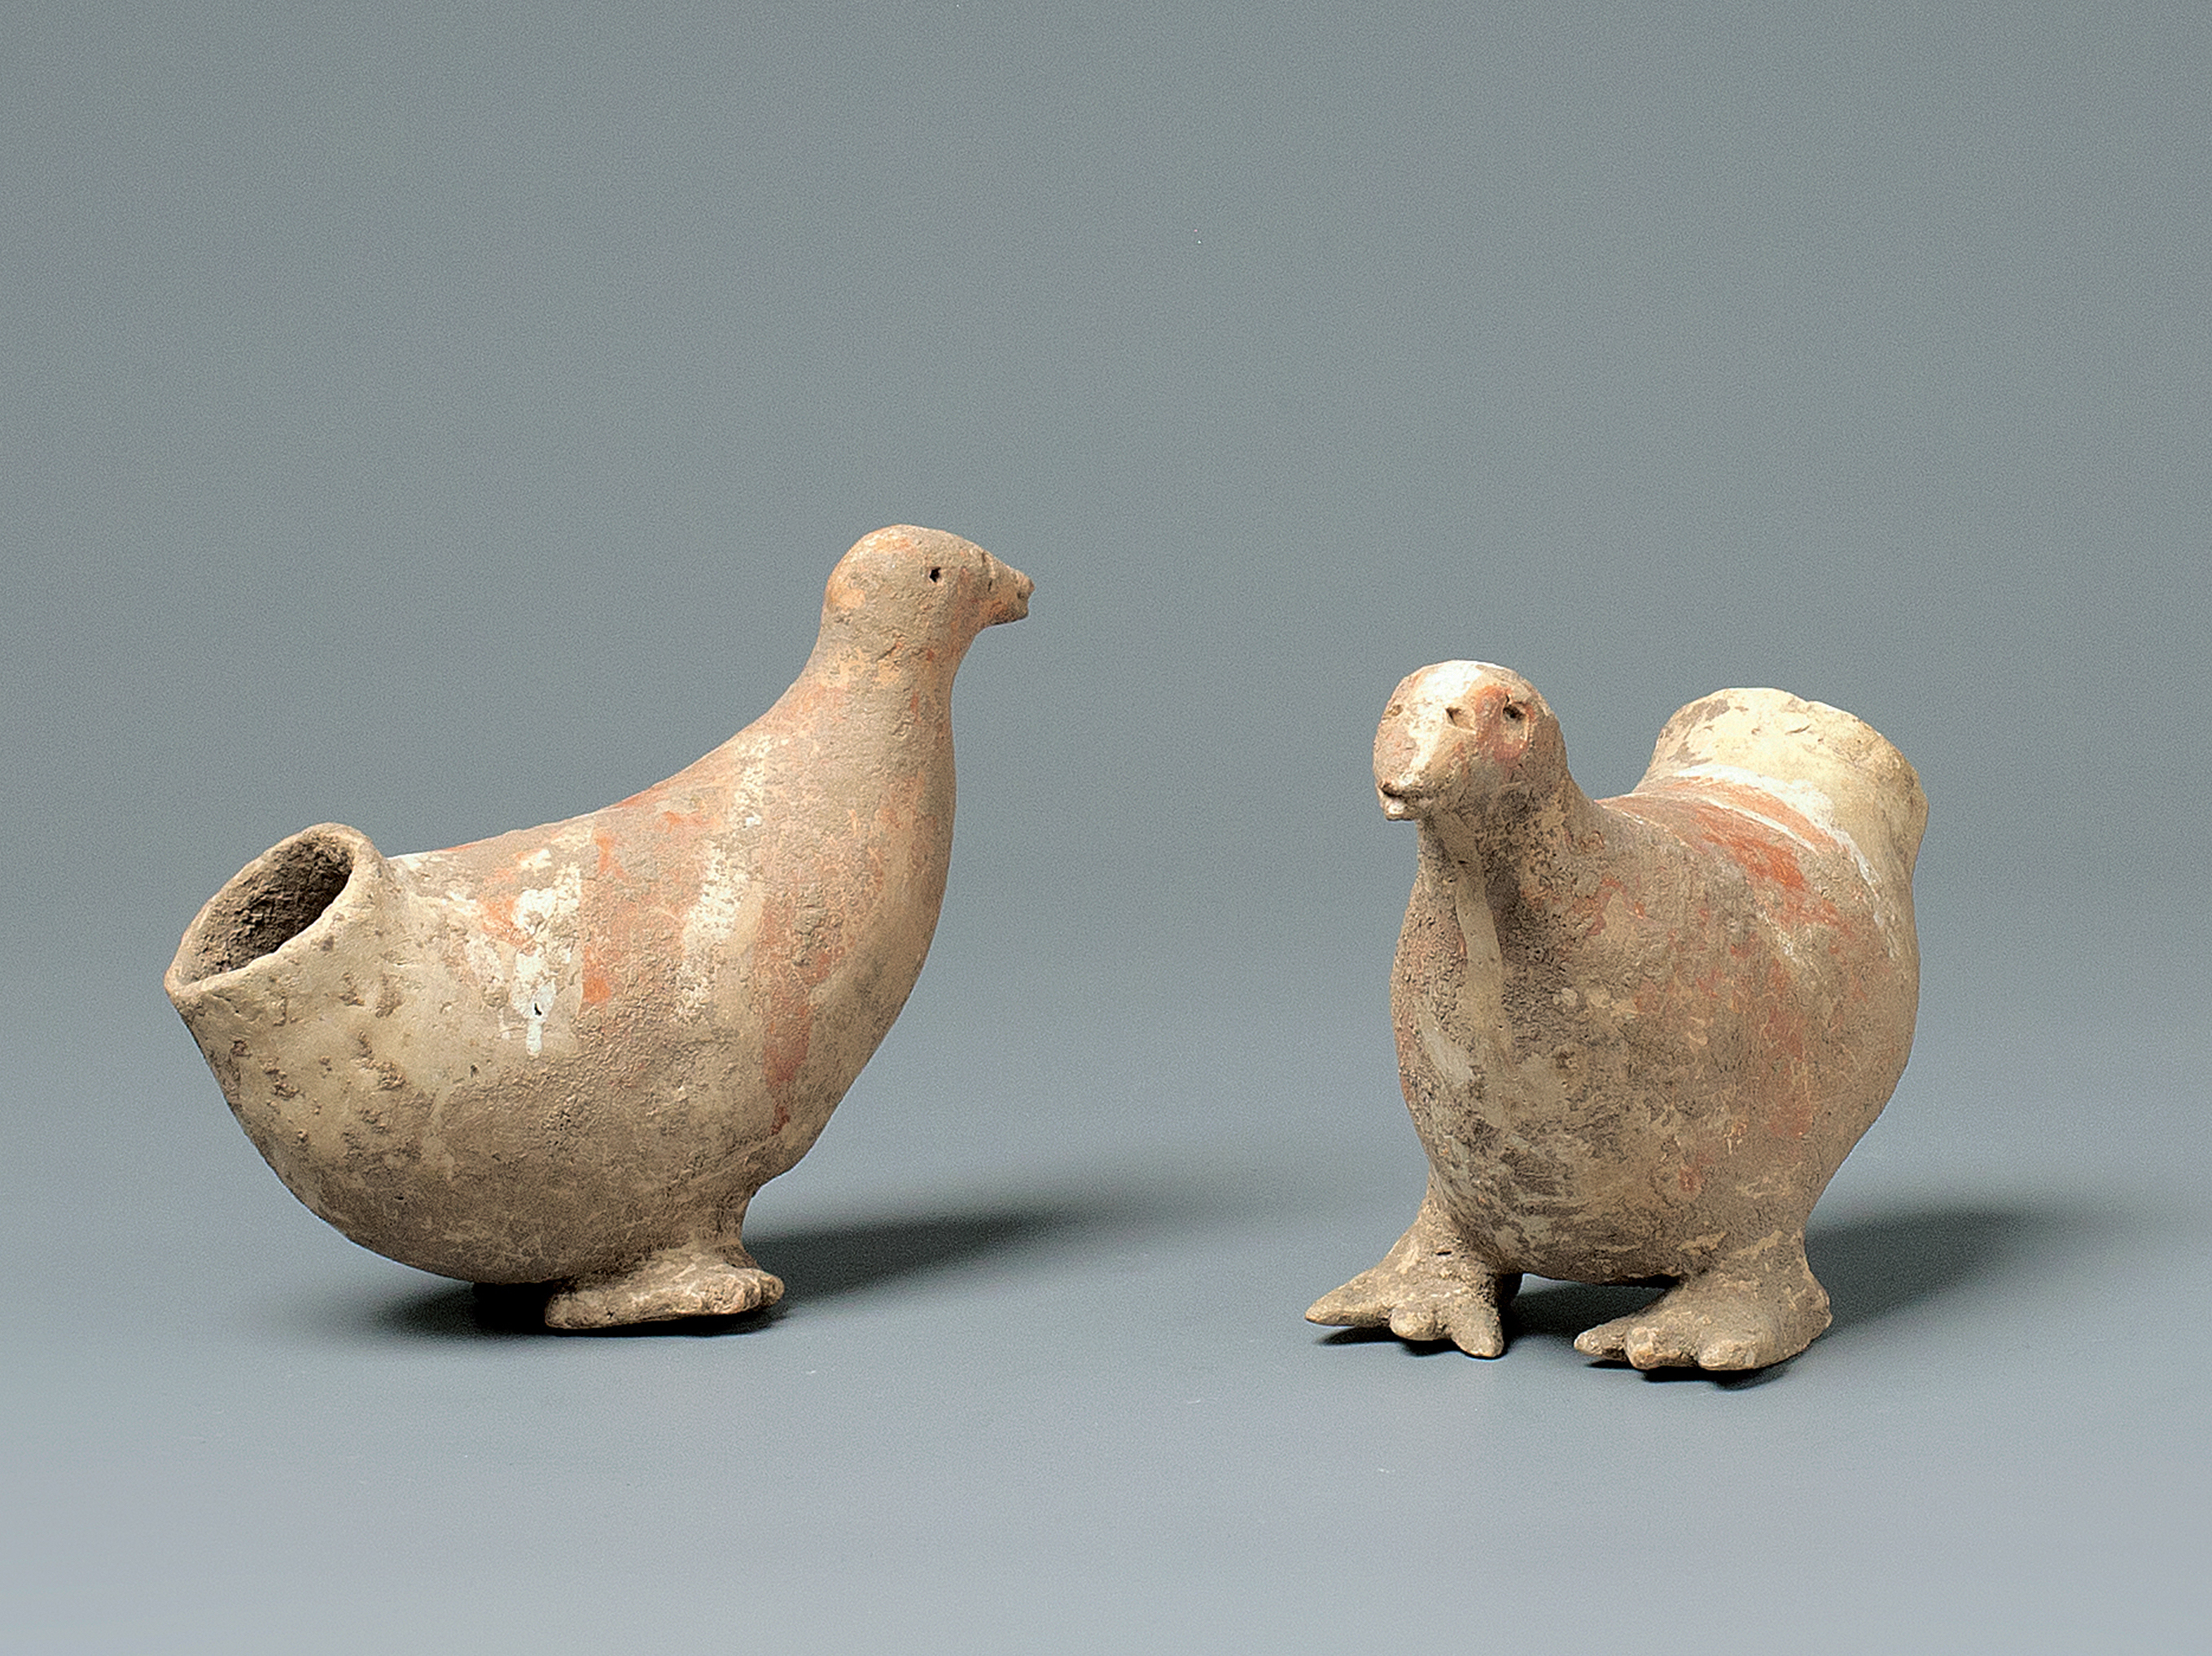 A Pair Of Pottery Birds, Qijia Culture (2050-1700 Bc)